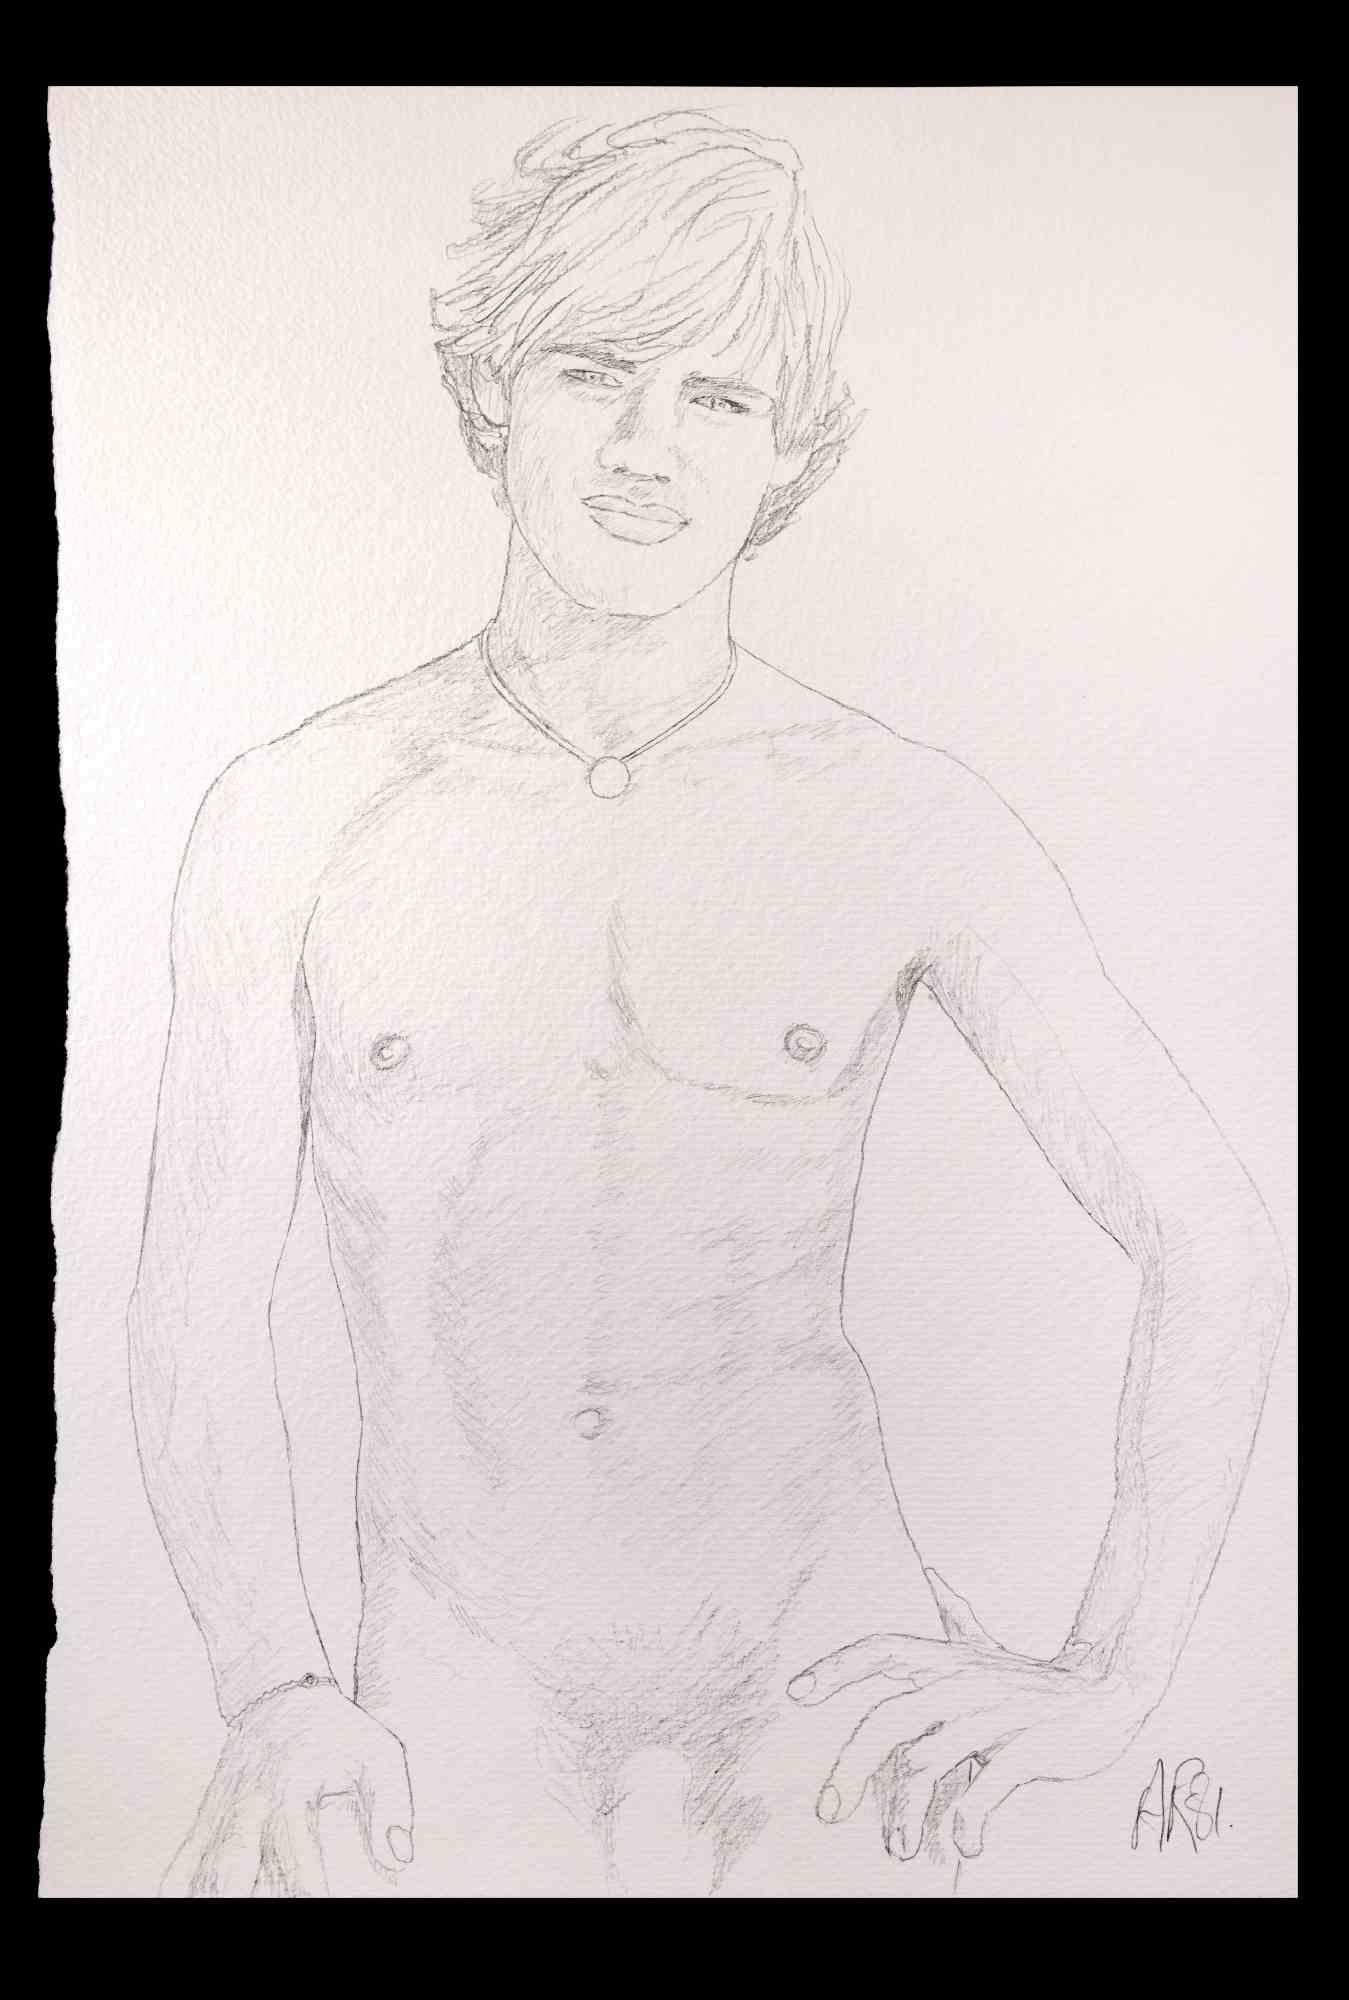 Portrait of a boy  is an original drawing on pencil realized by Anthony Roaland in 1981. Hand-signed and dated by the artist on the lower right margin. 

The artwork represents a fresh and beautiful nude male portrait .

Good conditions.